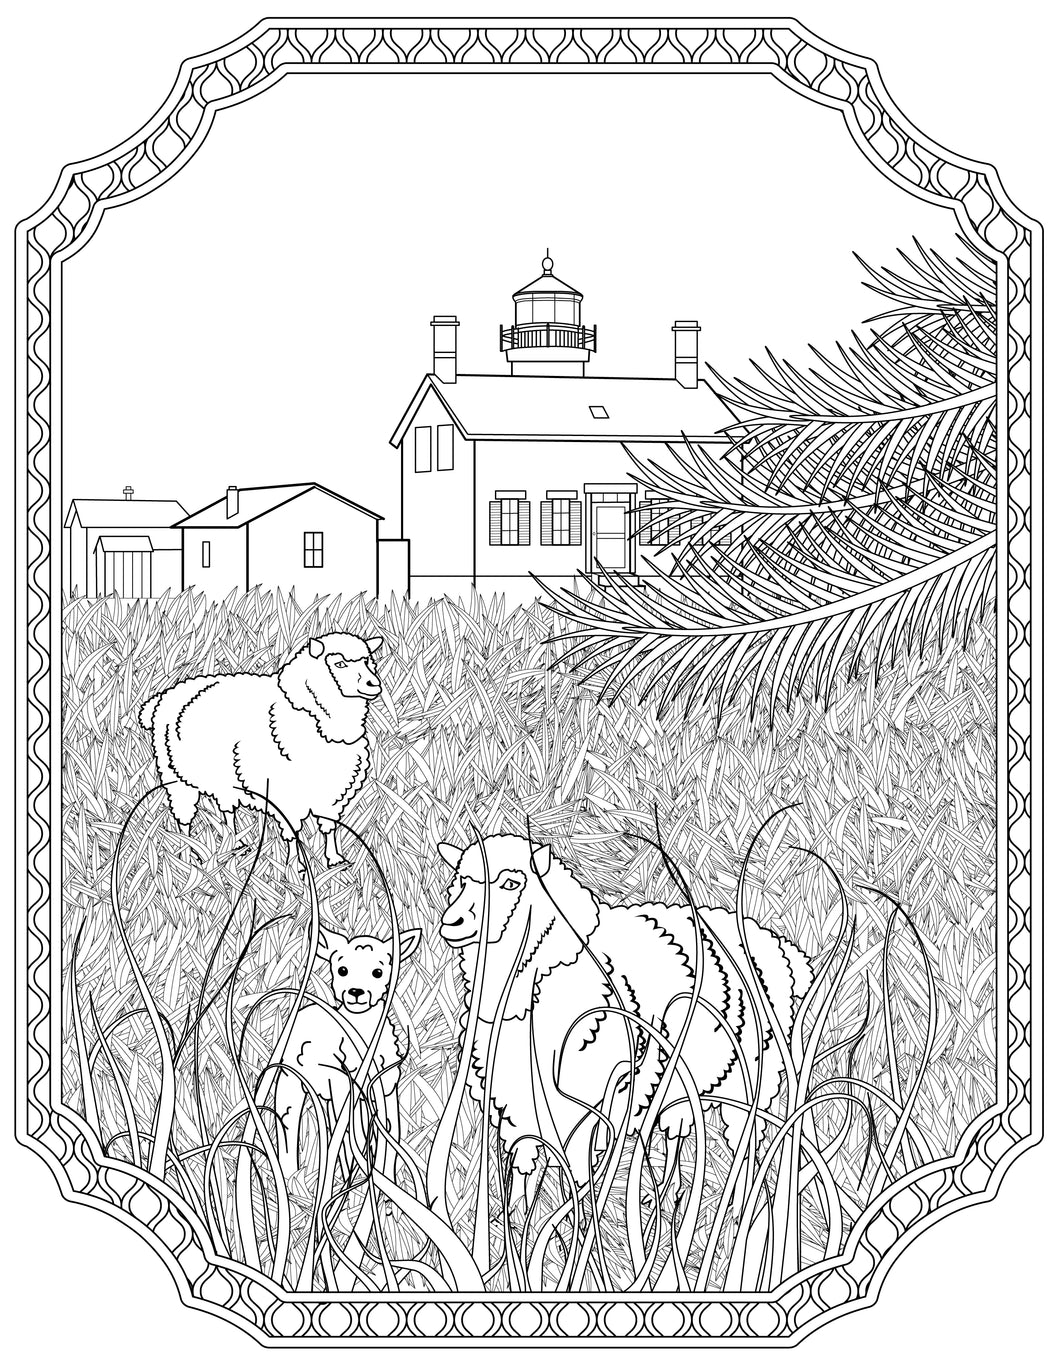 Single Coloring Book Page - Smith Island Lighthouse, Washington - Digital Print-from-Home